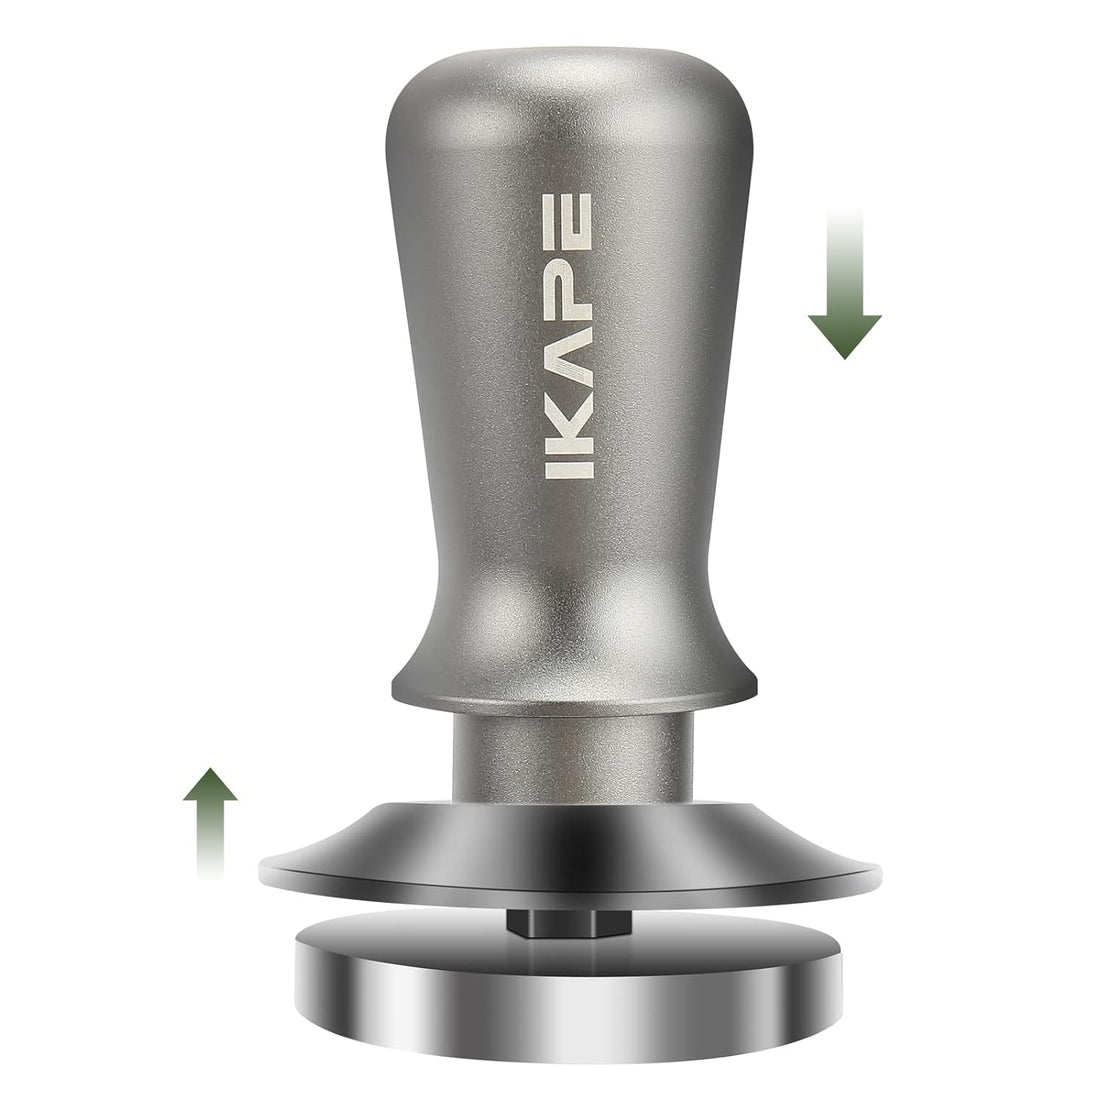 IKAPE 51mm Espresso Tamper, Premium Barista Coffee Tamper with Calibrated Spring Loaded, 100% Flat Stainless Steel Base Tamper for Espresso Machine